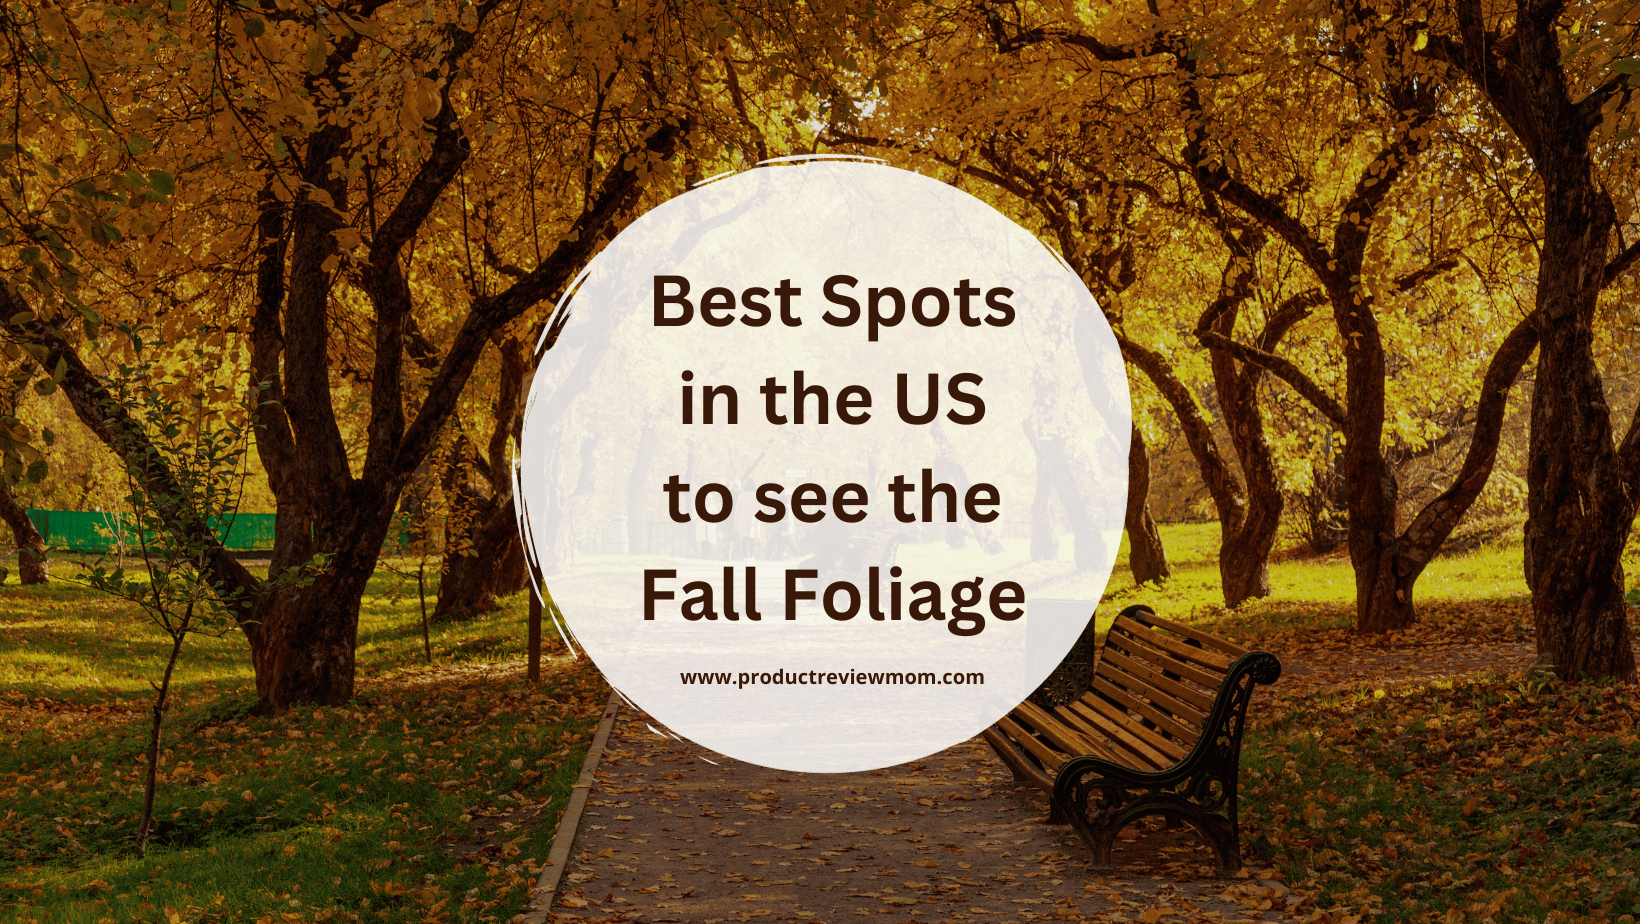 Best Spots in the US to see the Fall Foliage